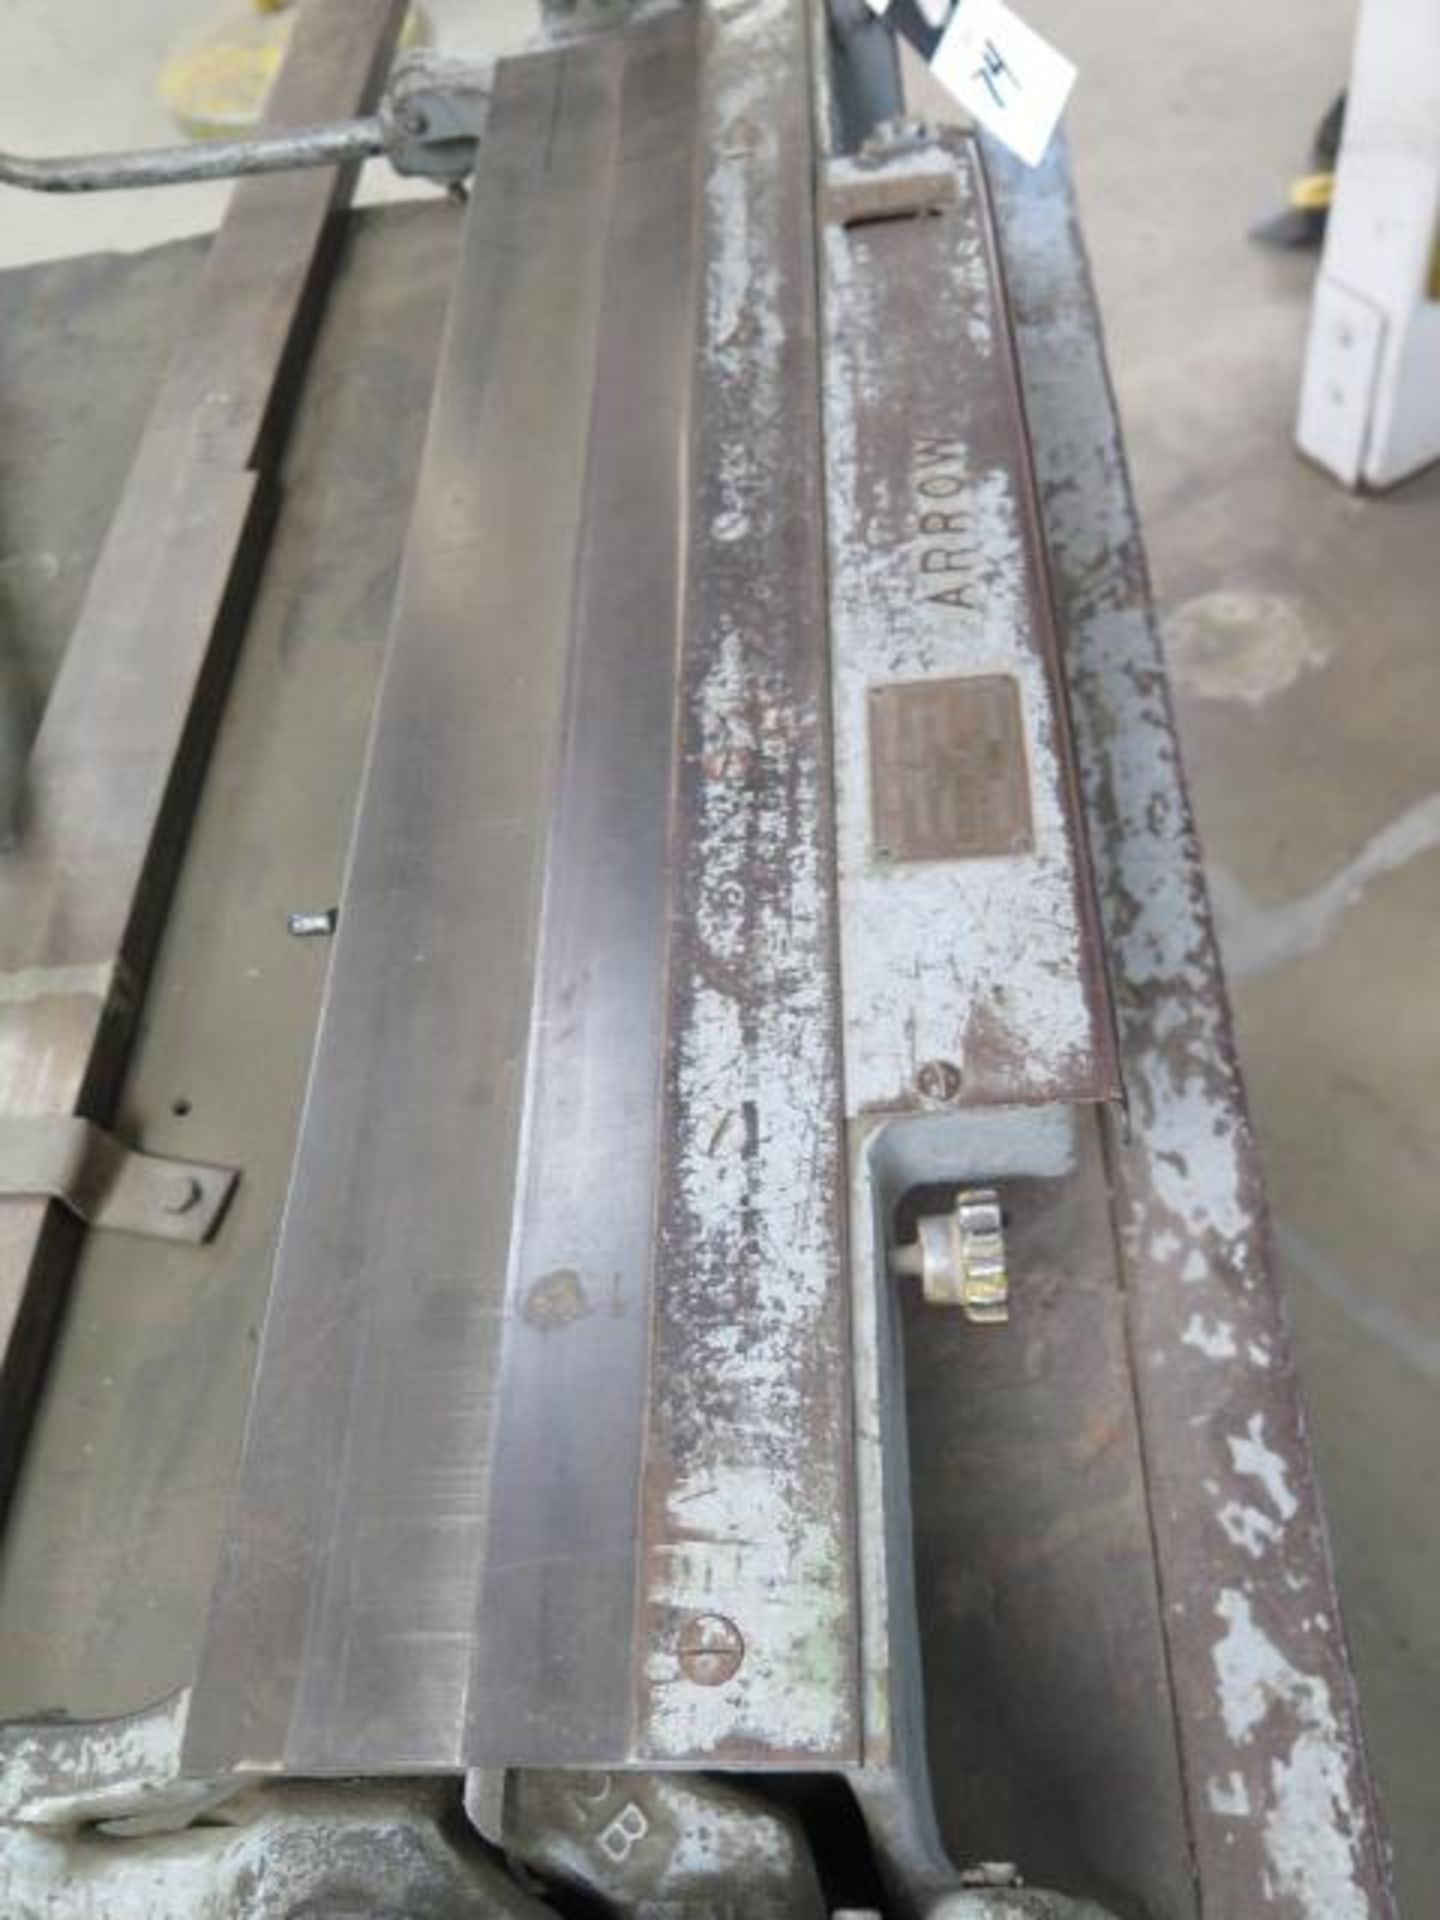 Pexto mdl. 63F 22GA x 30” Bar Folder s/n 46 (SOLD AS-IS - NO WARRANTY) - Image 3 of 6